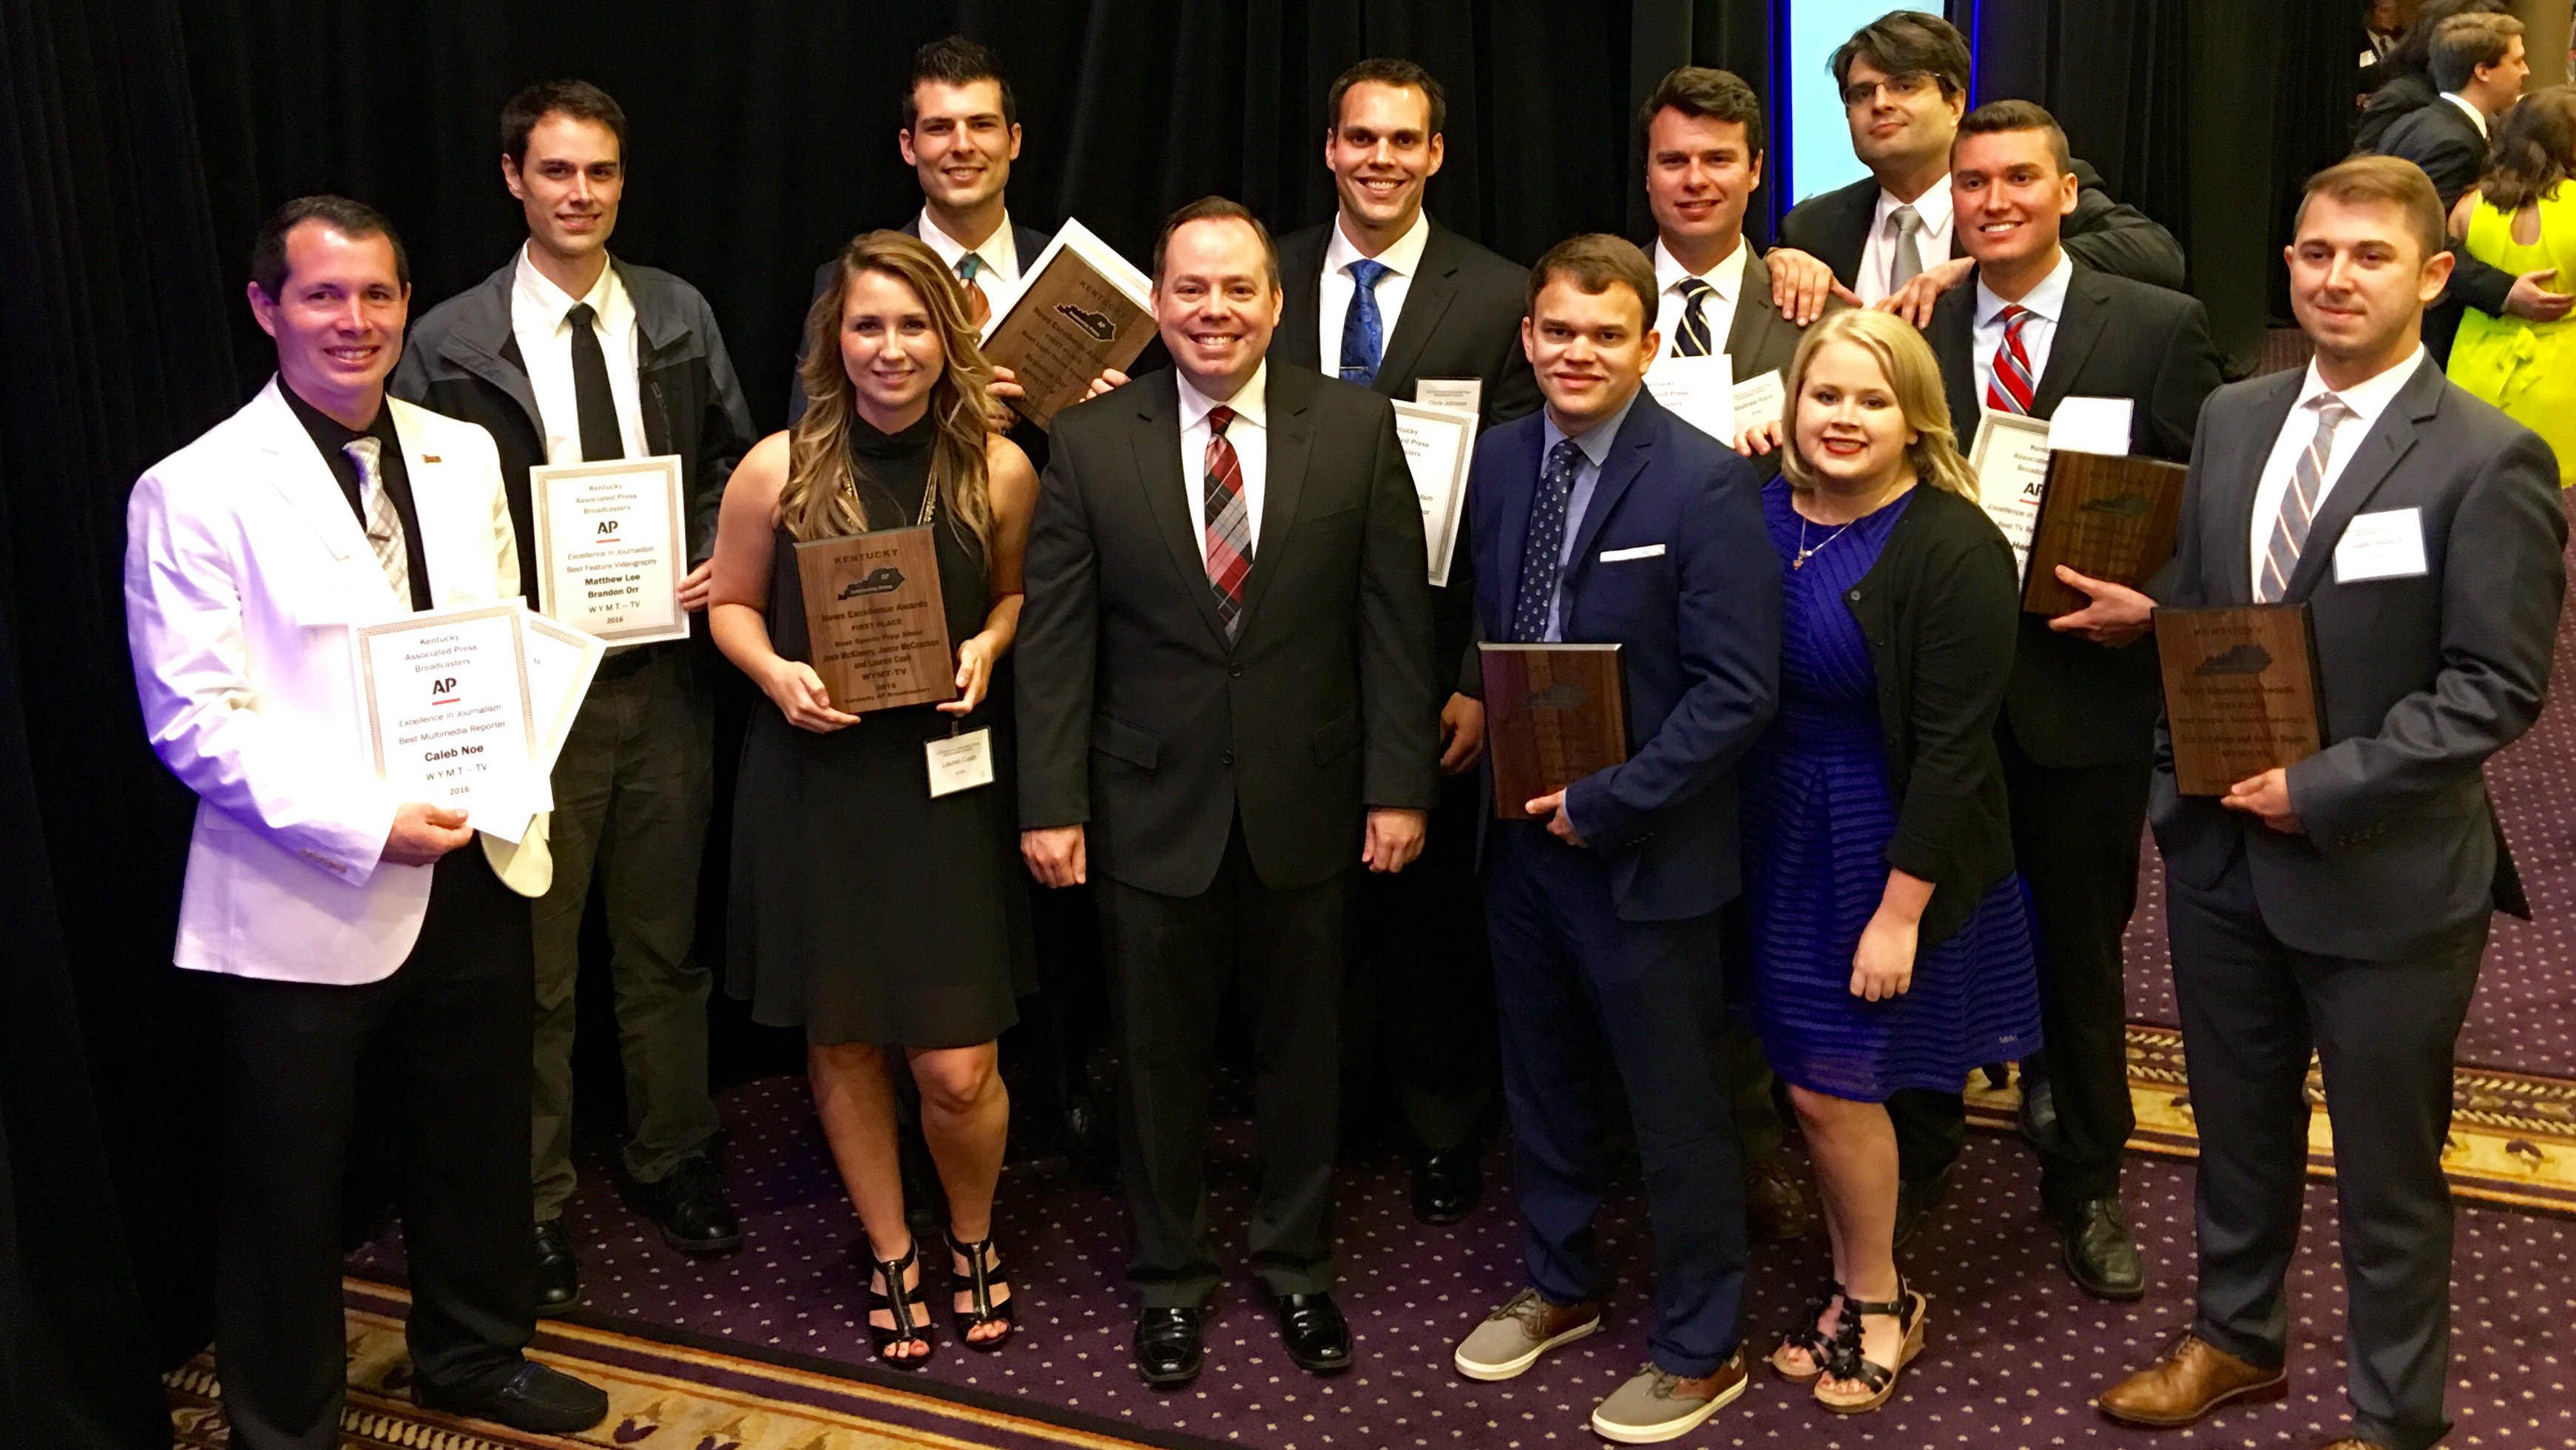 WYMT wins 7 first place awards at AP banquet